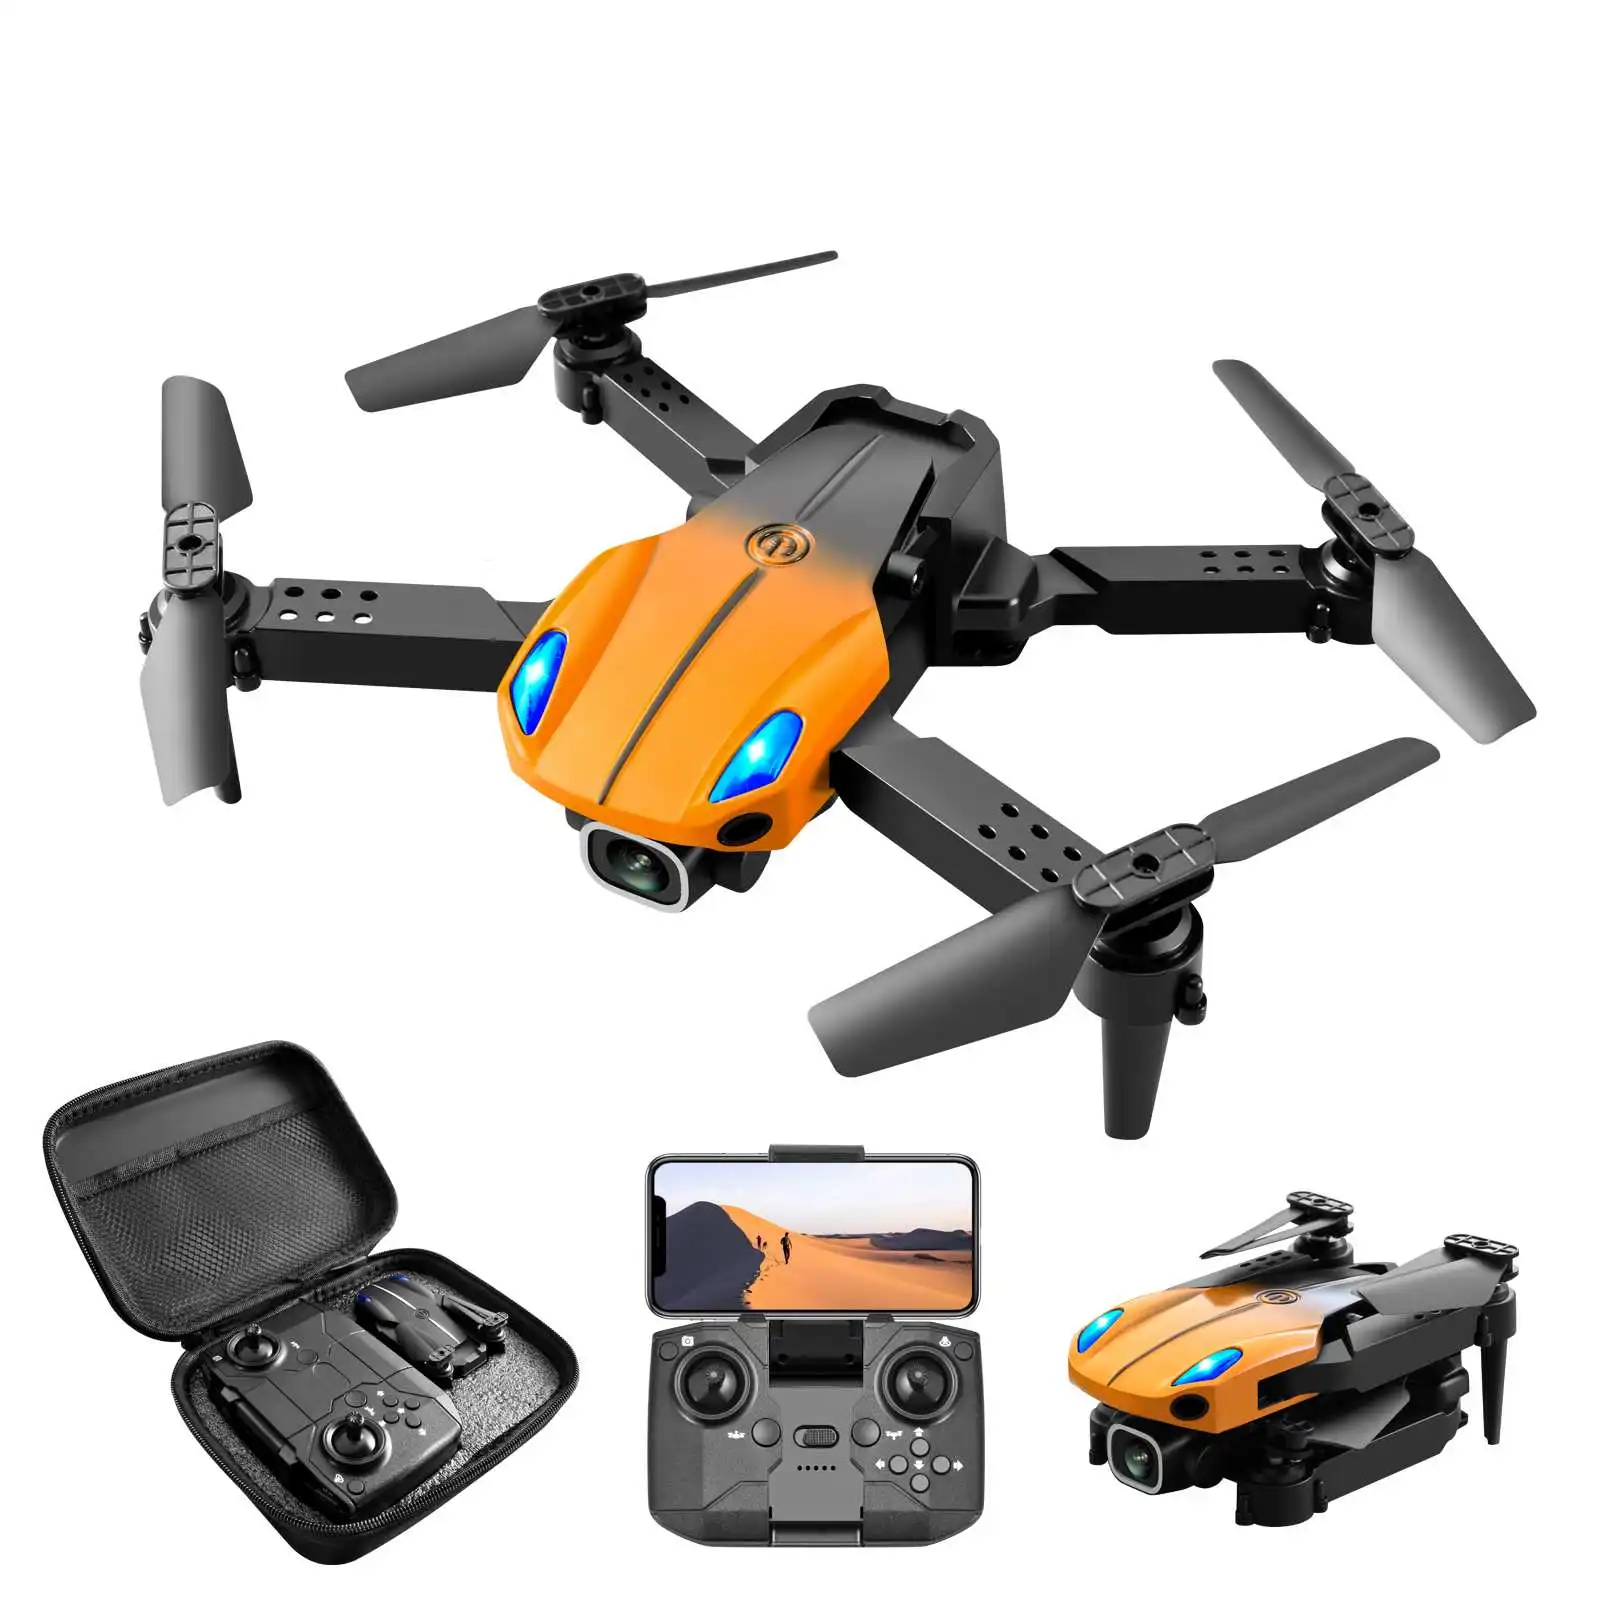 

KY907 PRO Mini Drone Wifi FPV with 4K HD Camera Three-side Obstacle Avoidance Headless Mode RC Drones Quadcopter RTF Gift Toys